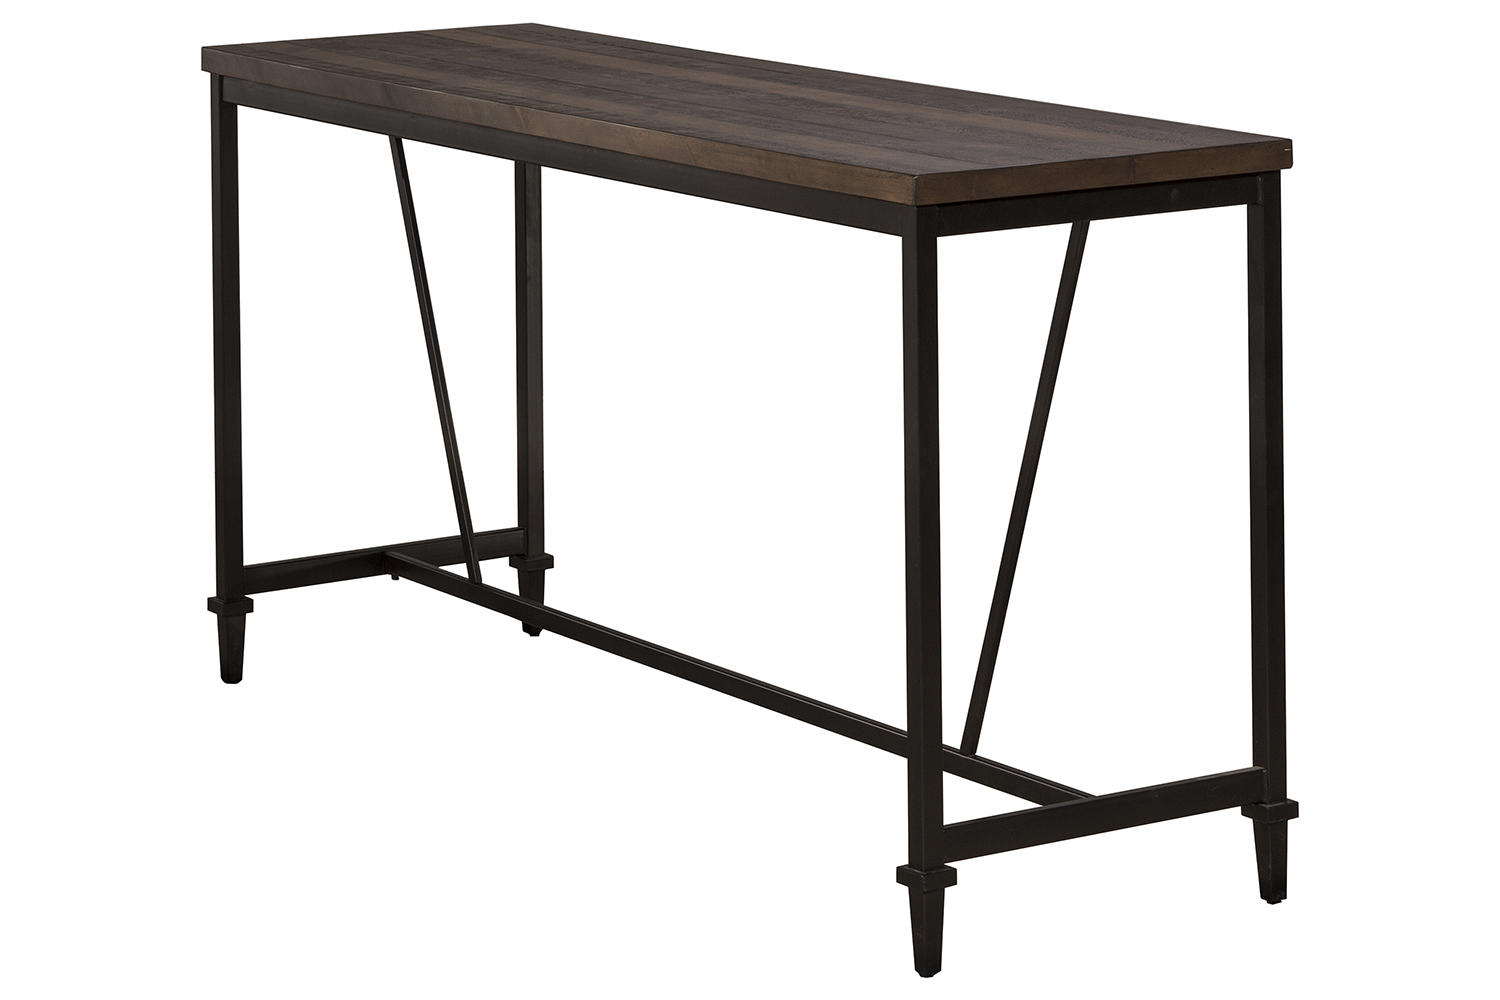 Hillsdale Trevino Counter Height Table - Walnut/Brown